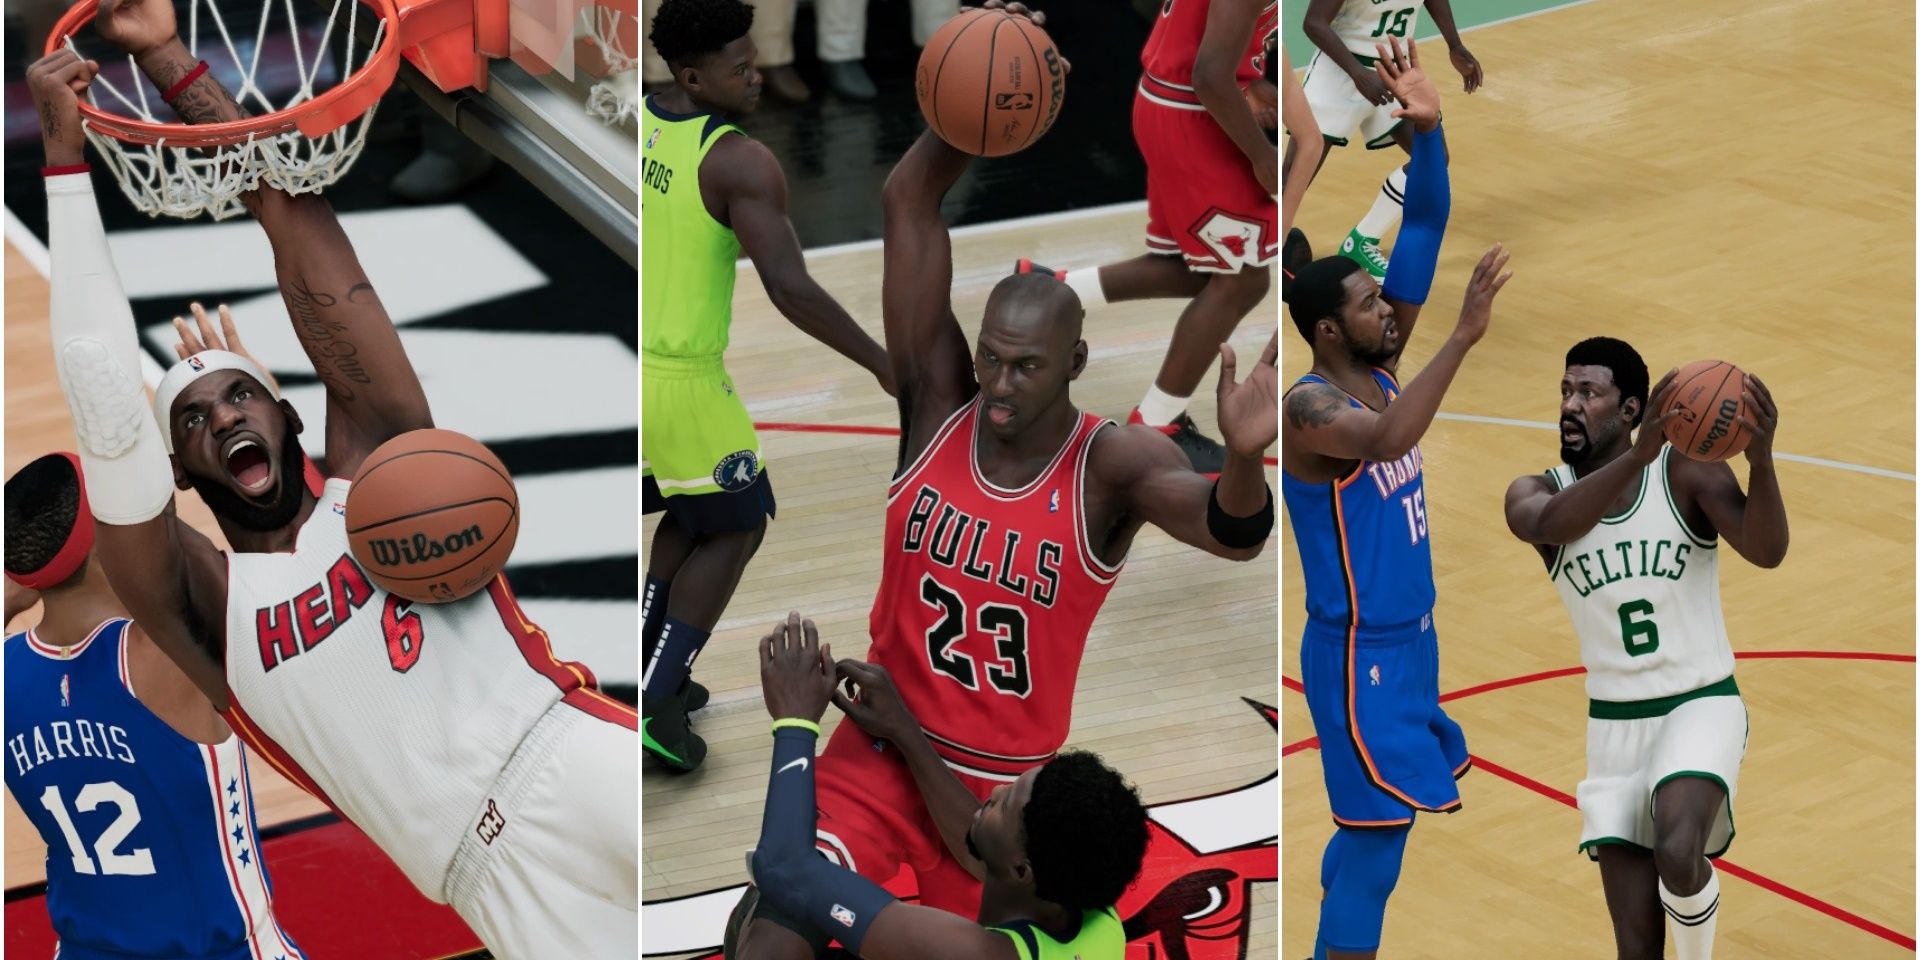 The players with the best average ratings in NBA 2K history